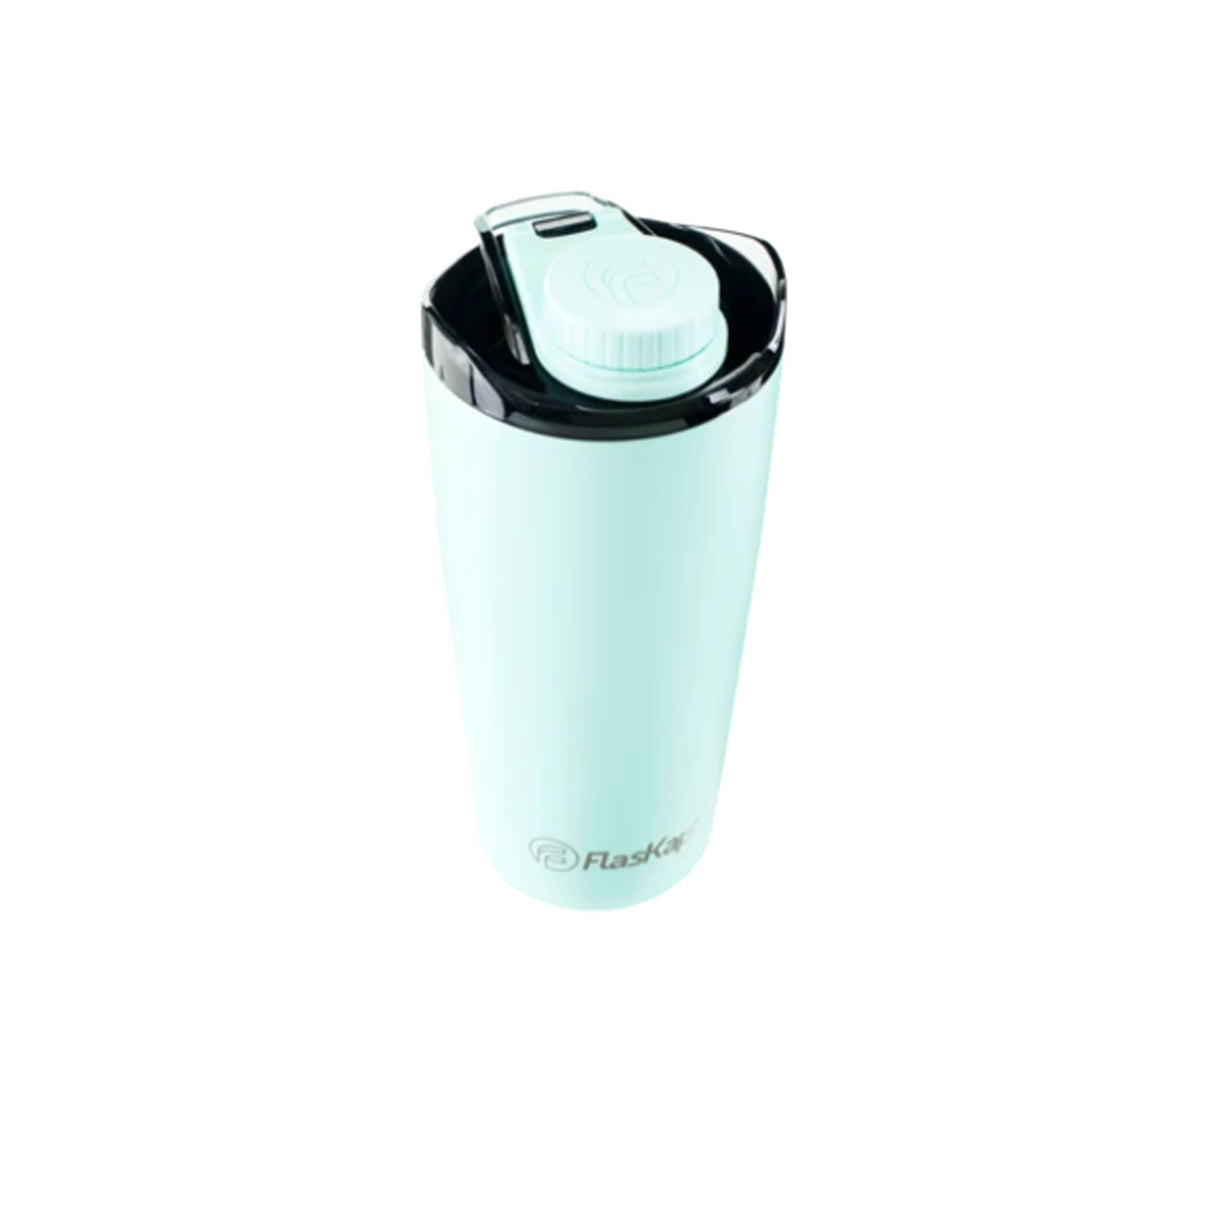 Flaskap Volst 22 Insulated Tumbler with Standard Lid | Keeps Drinks Warm or  Cold | Cup Holder Friend…See more Flaskap Volst 22 Insulated Tumbler with